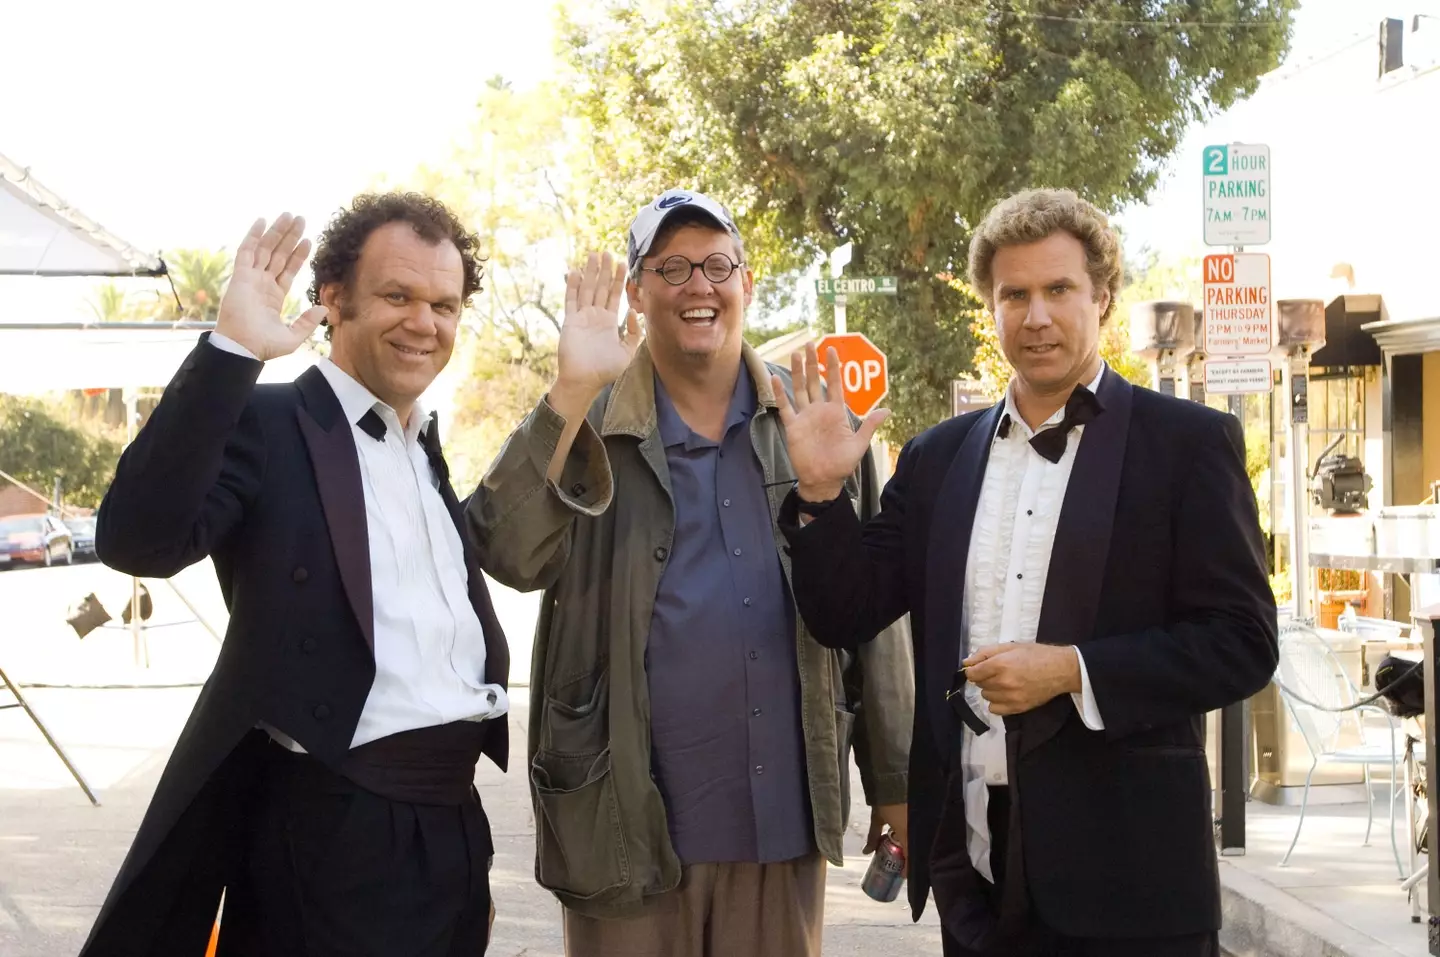 Ferrell and McKay with actor John C Reilly.